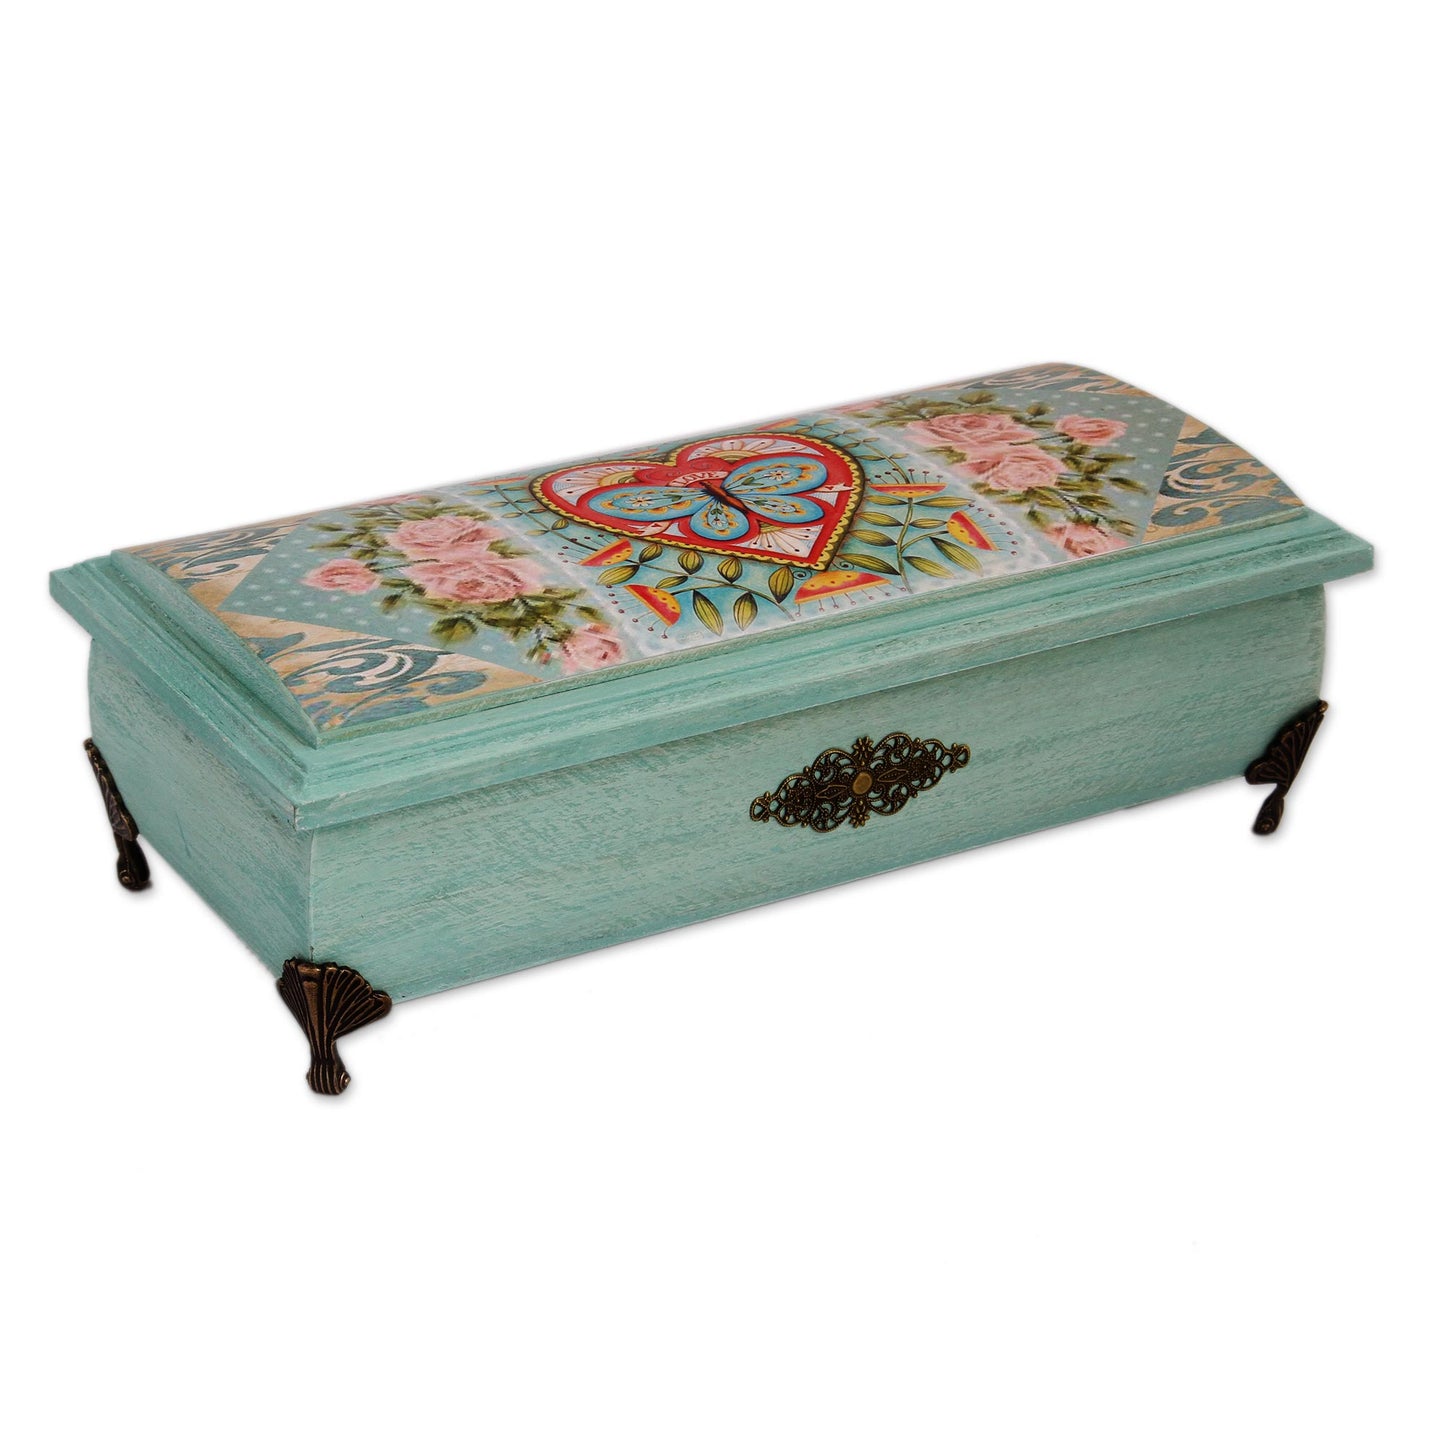 Butterfly Heart Butterfly Heart Decoupage Wood Decorative Box from Mexico